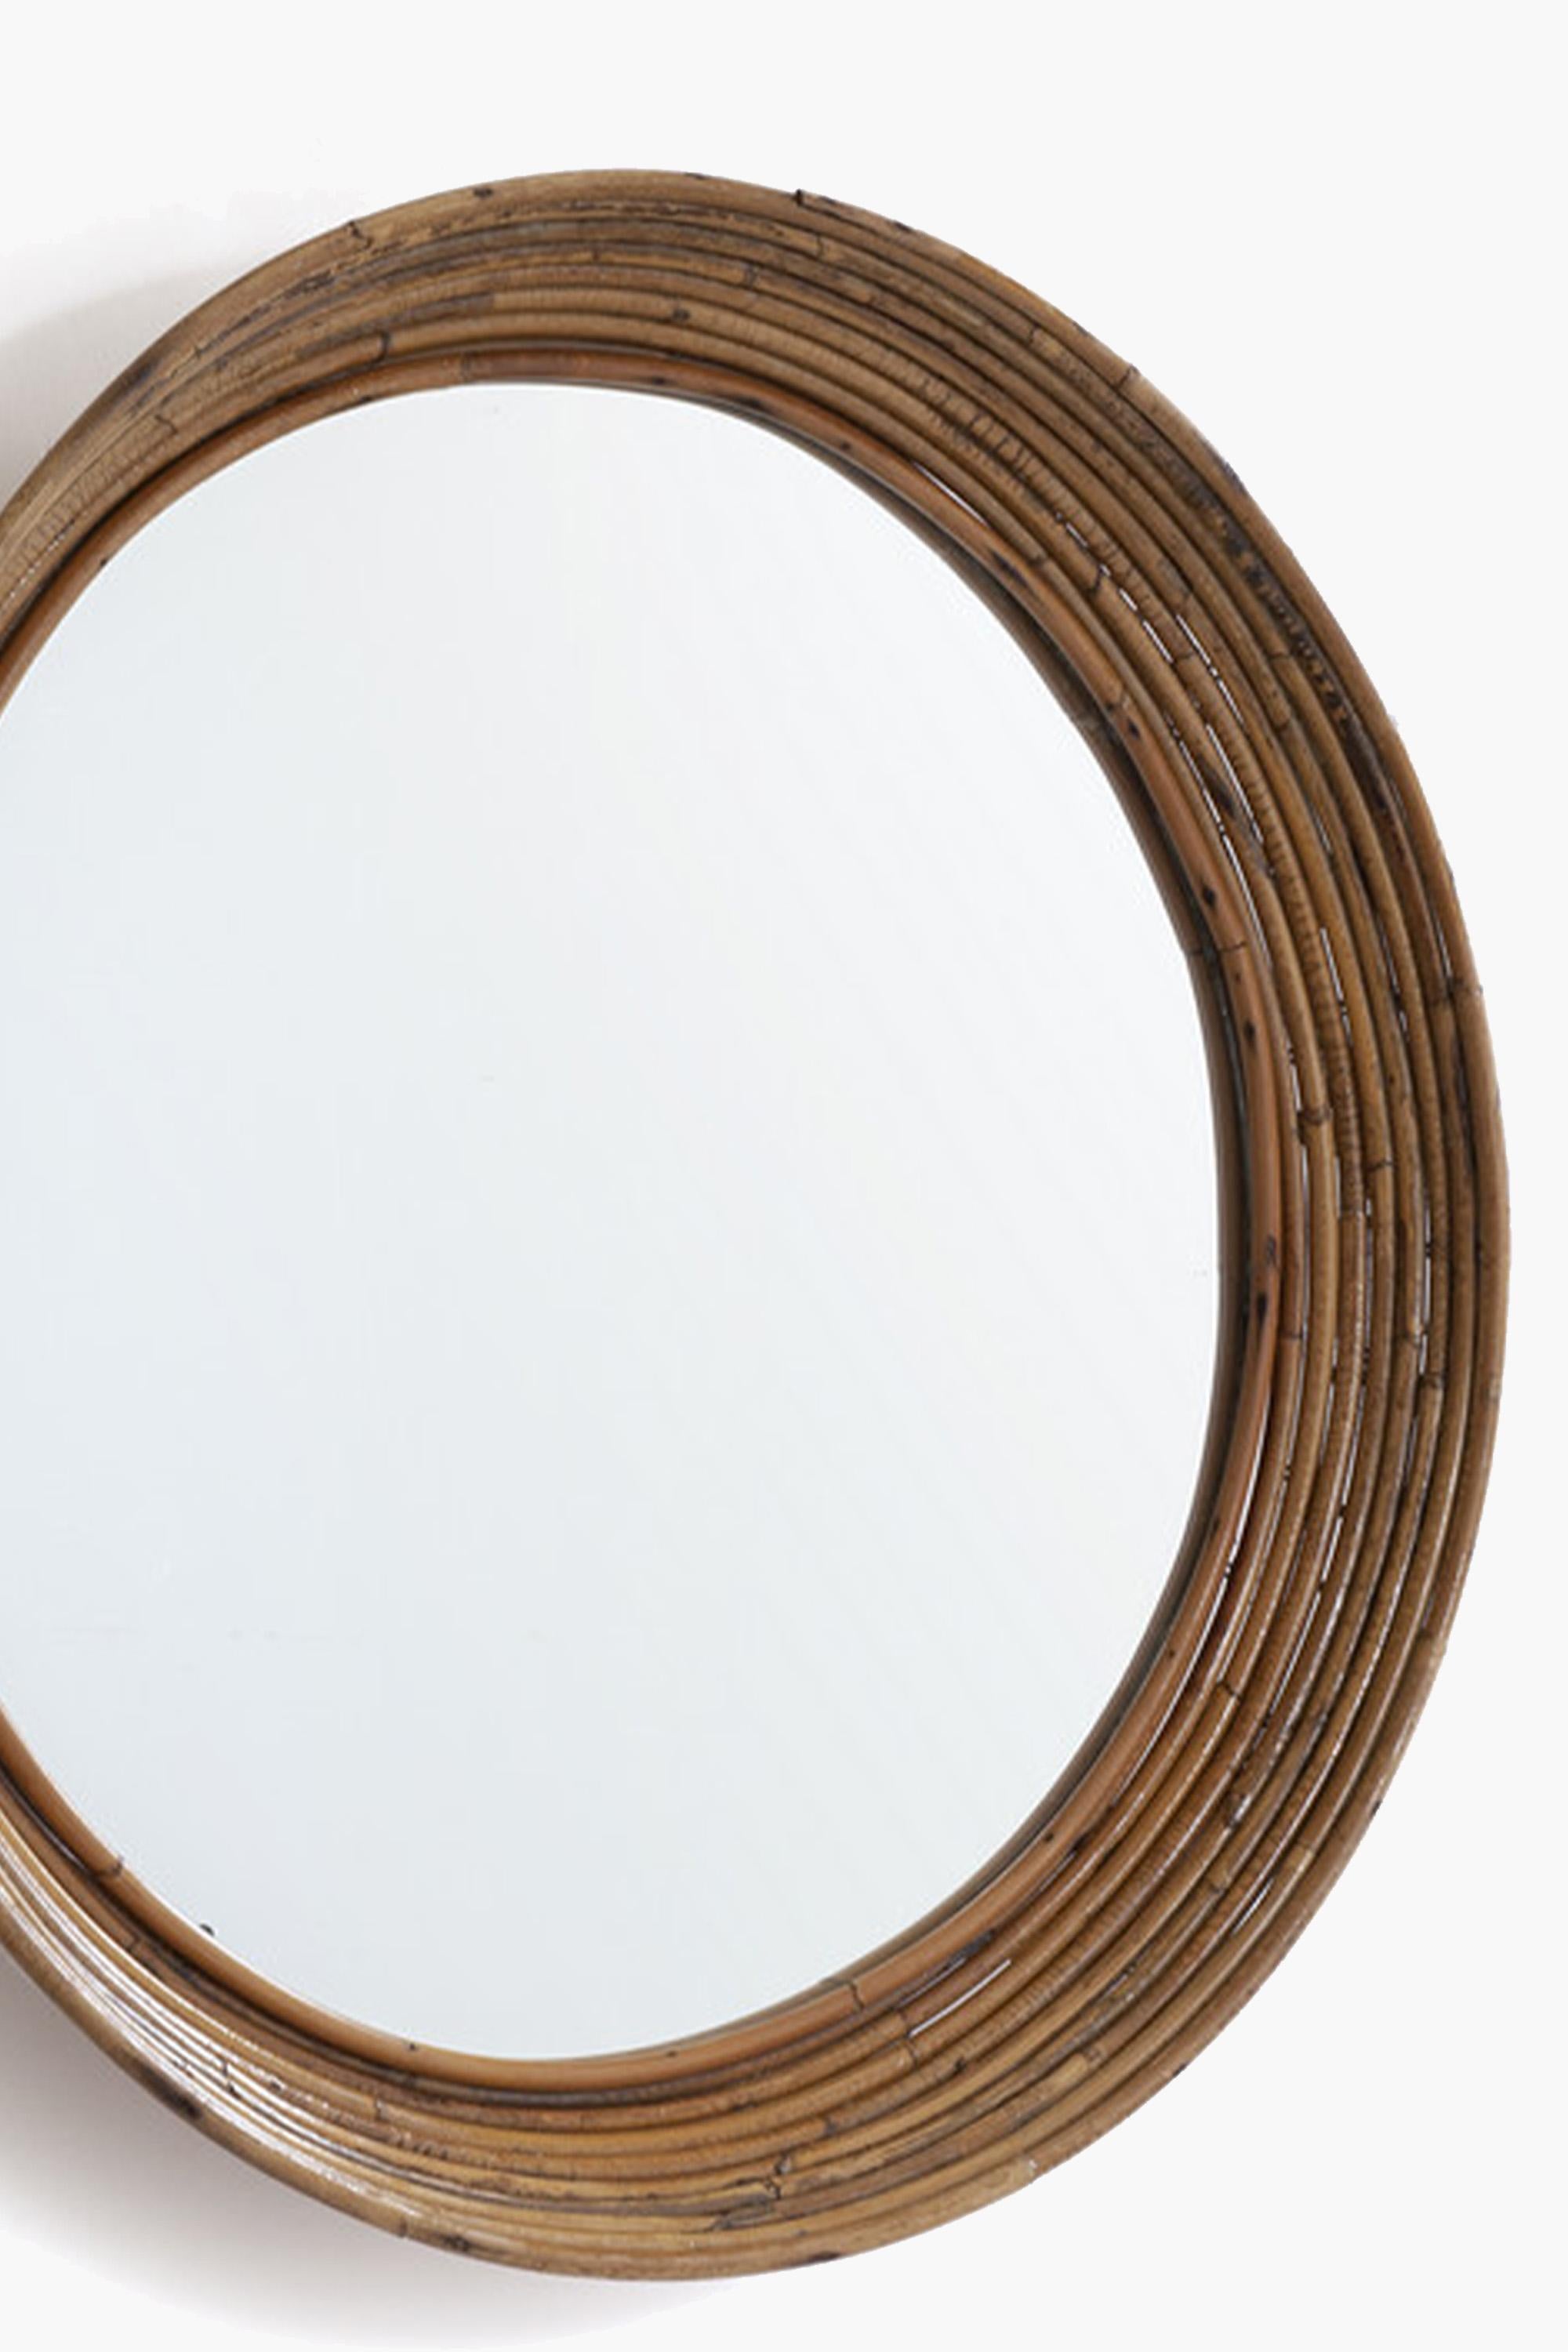 Italian Cane Mirror Attributed to Vivai Del Sud, 1960s In Good Condition For Sale In London, GB